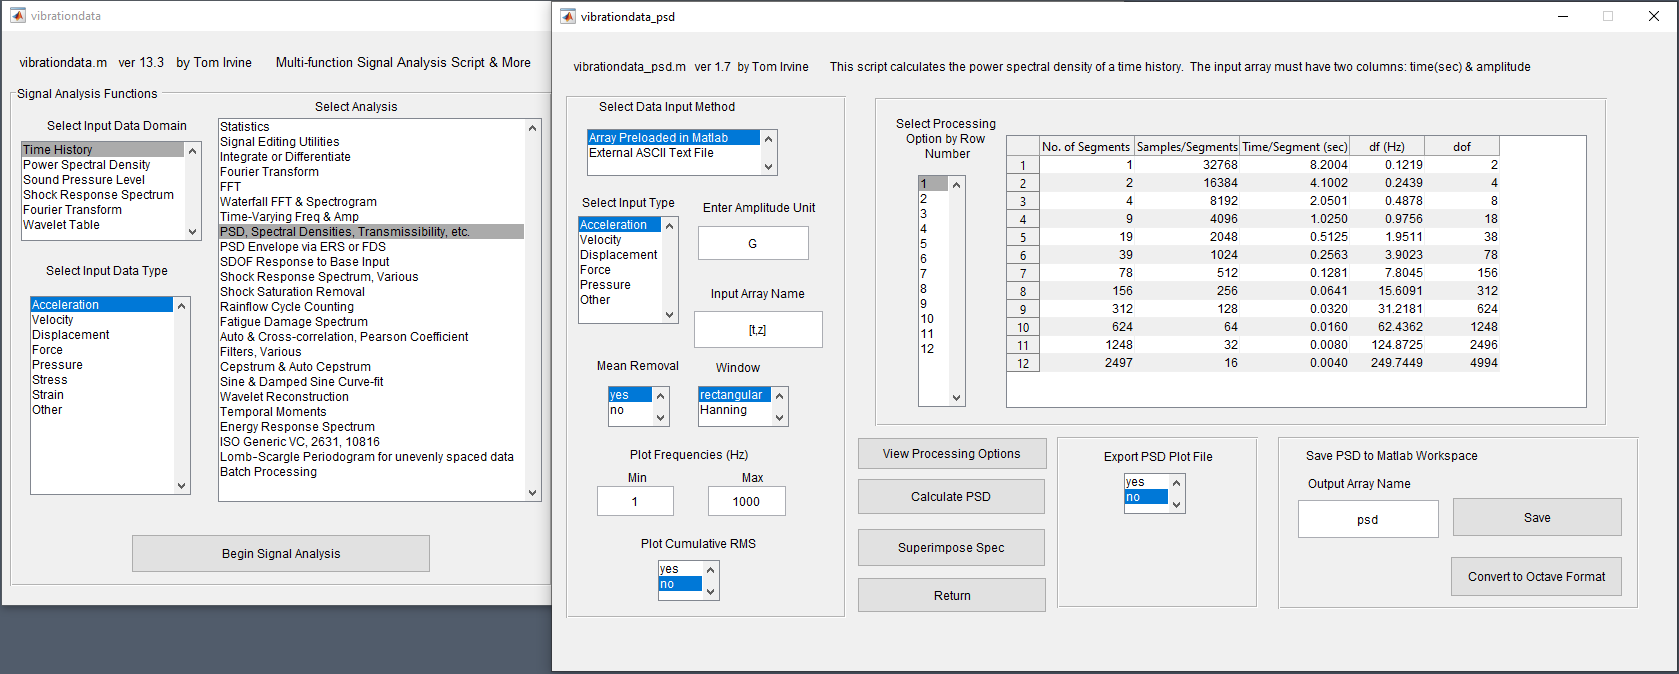 How to calculate PSD using Tom Irvine's vibration data toolbox